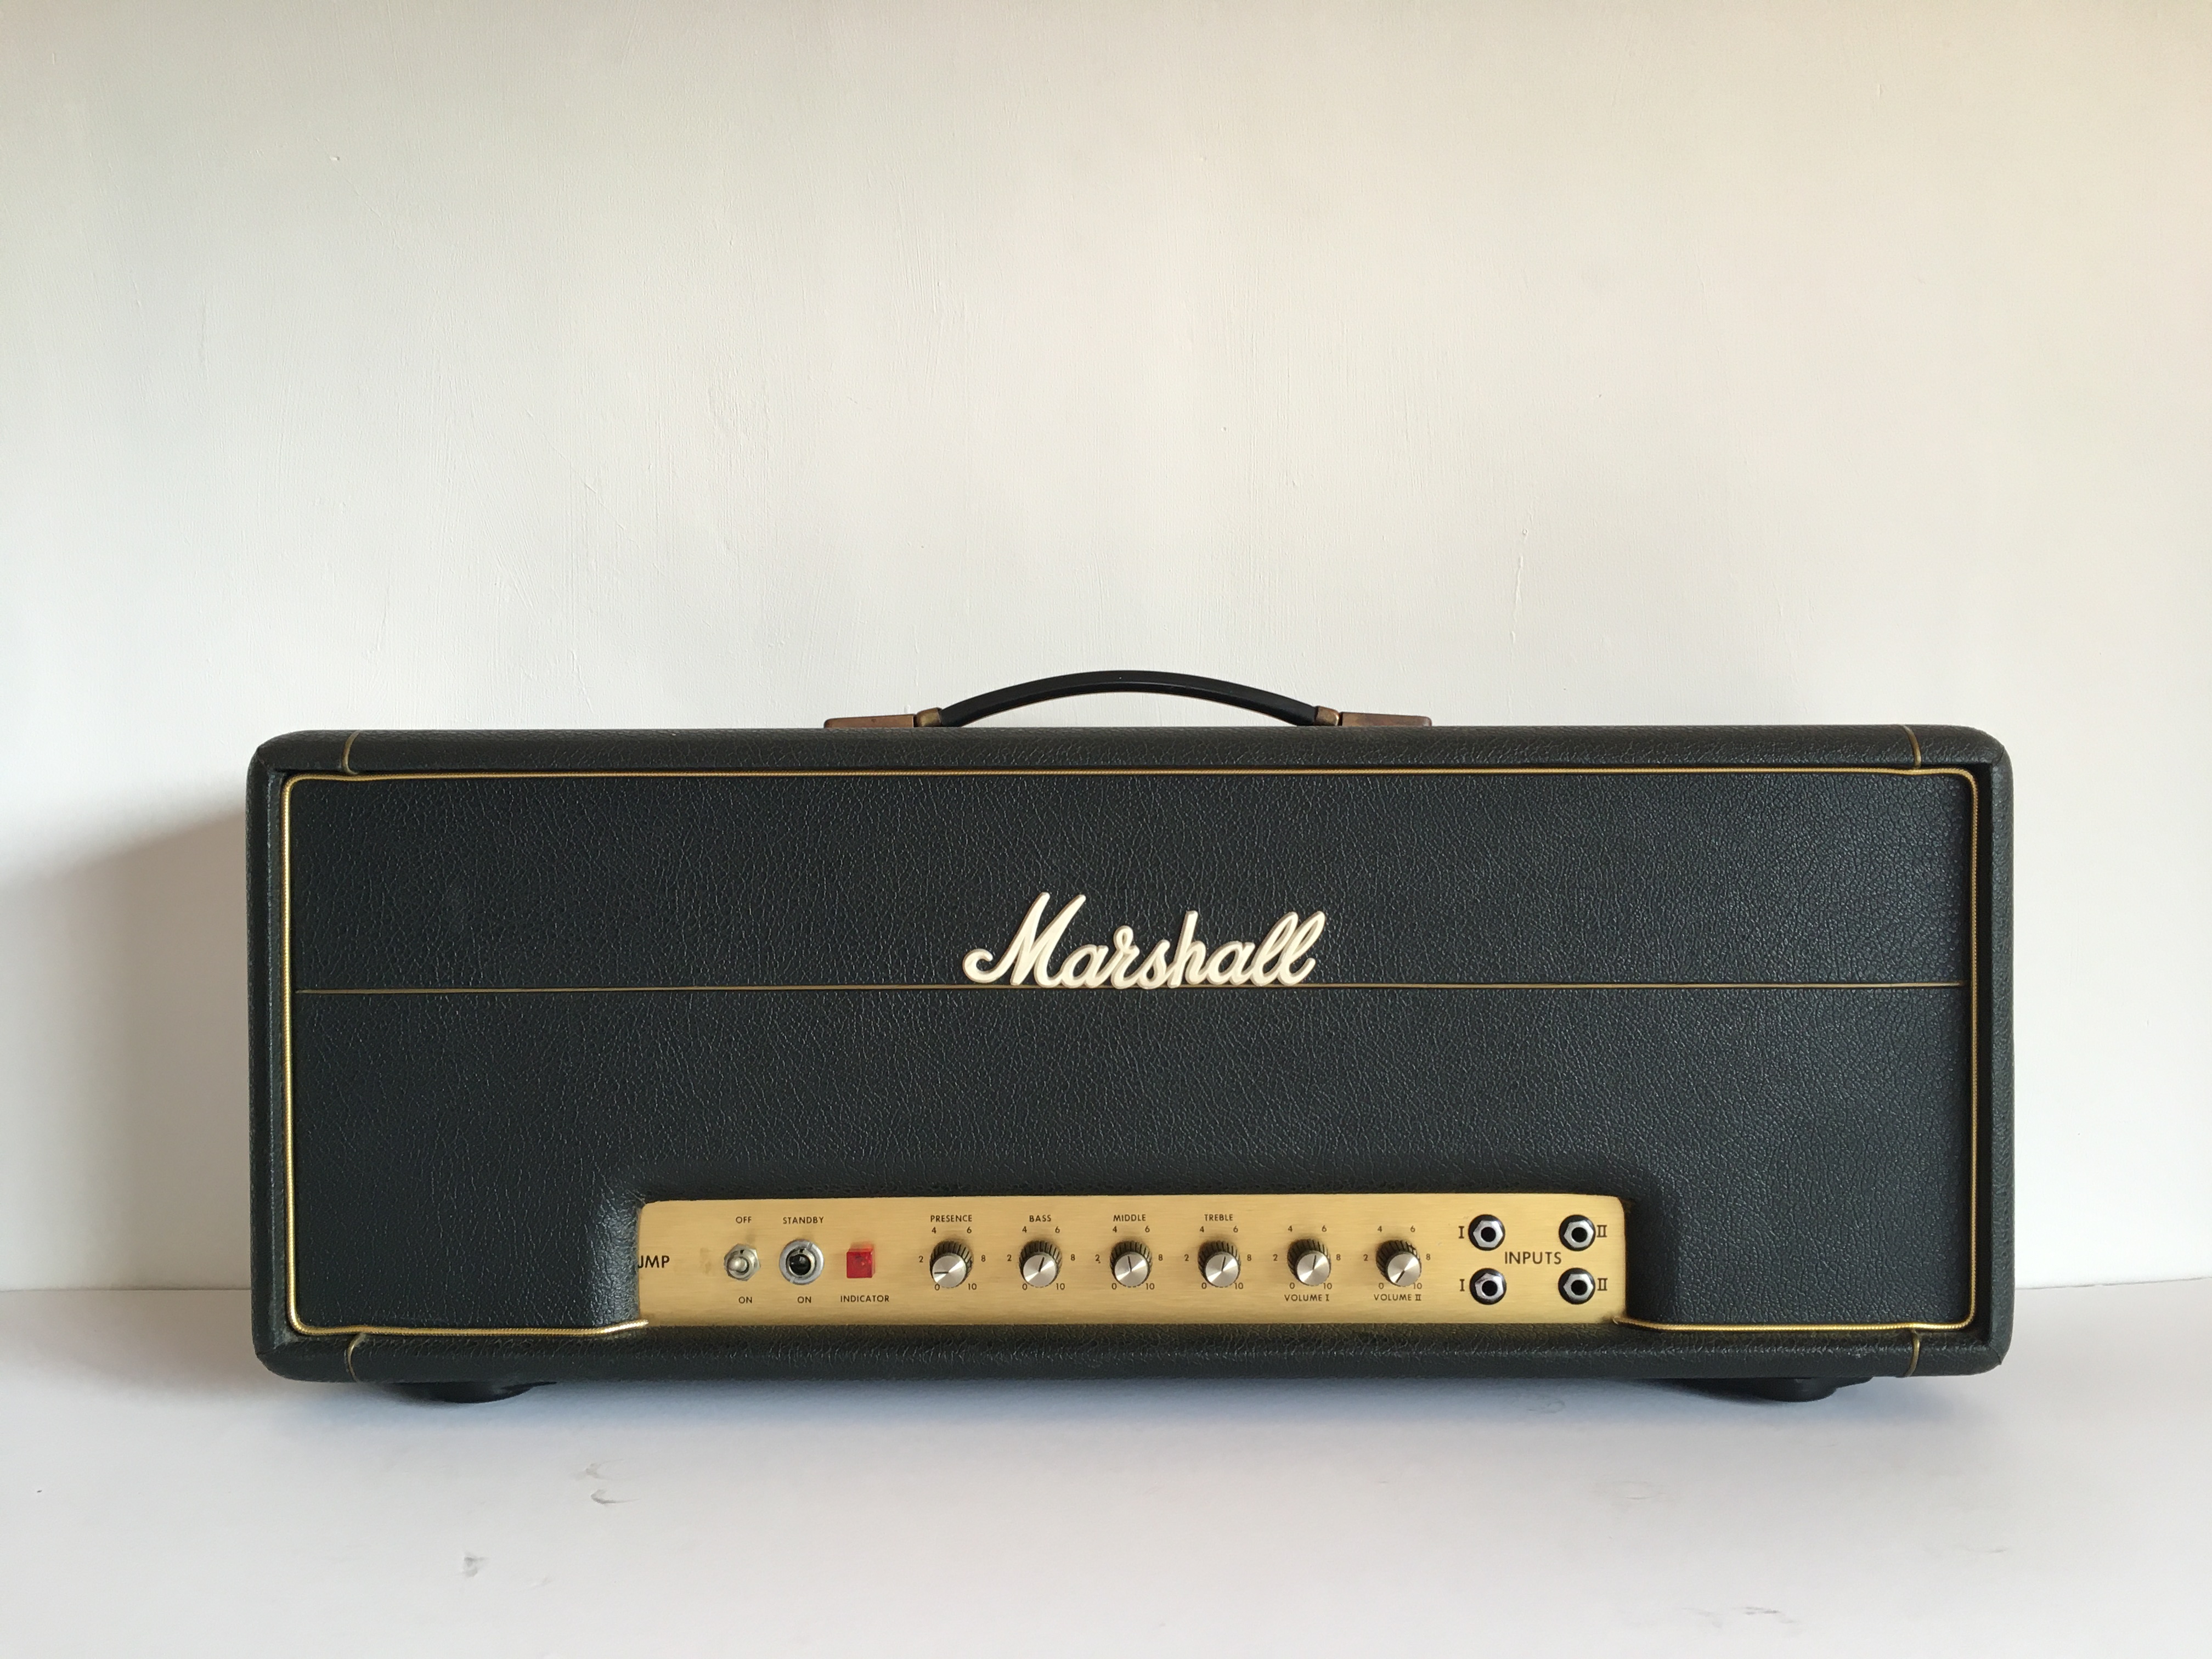 dating marshall amps by serial number)